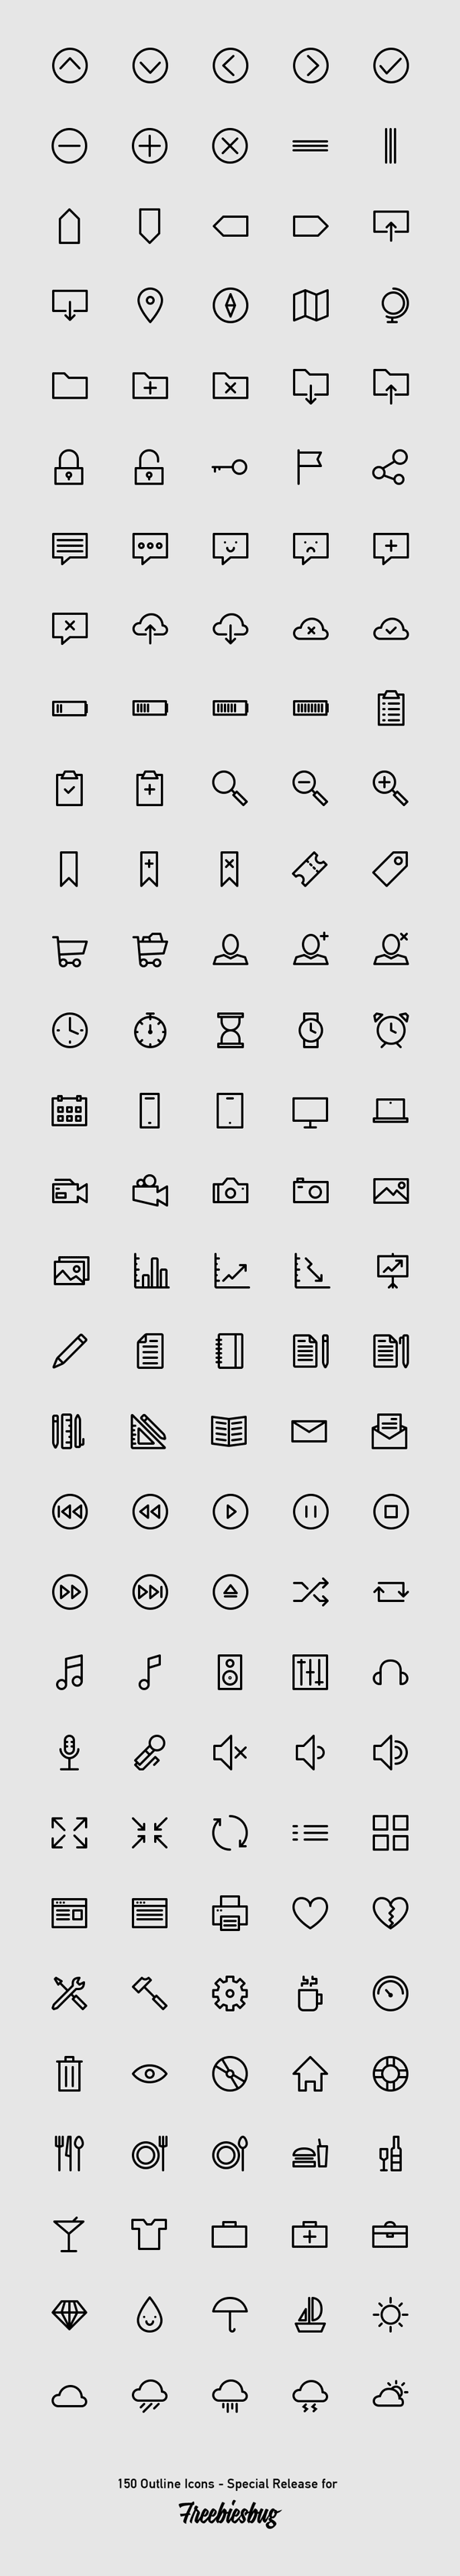 Outlined_Icons-600